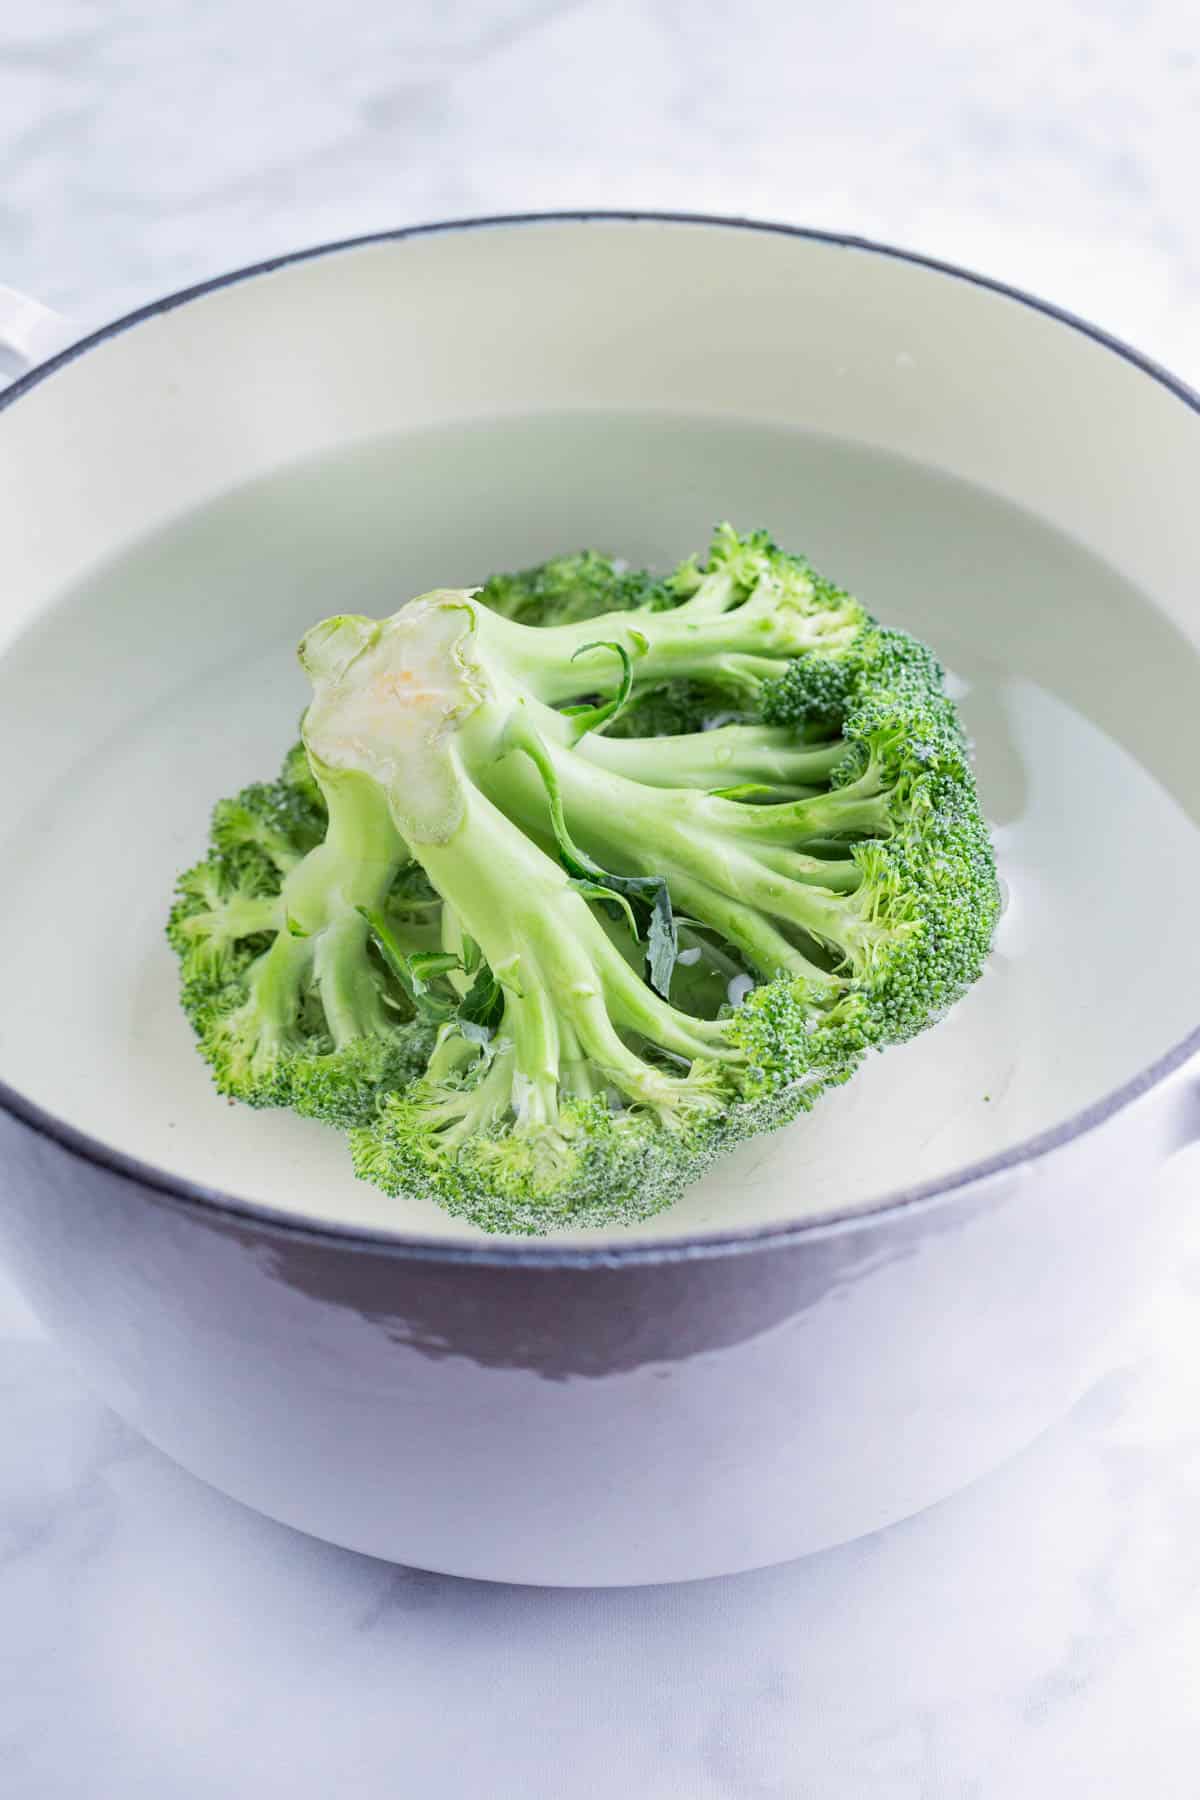 A head of broccoli is boiled in a pot of water.